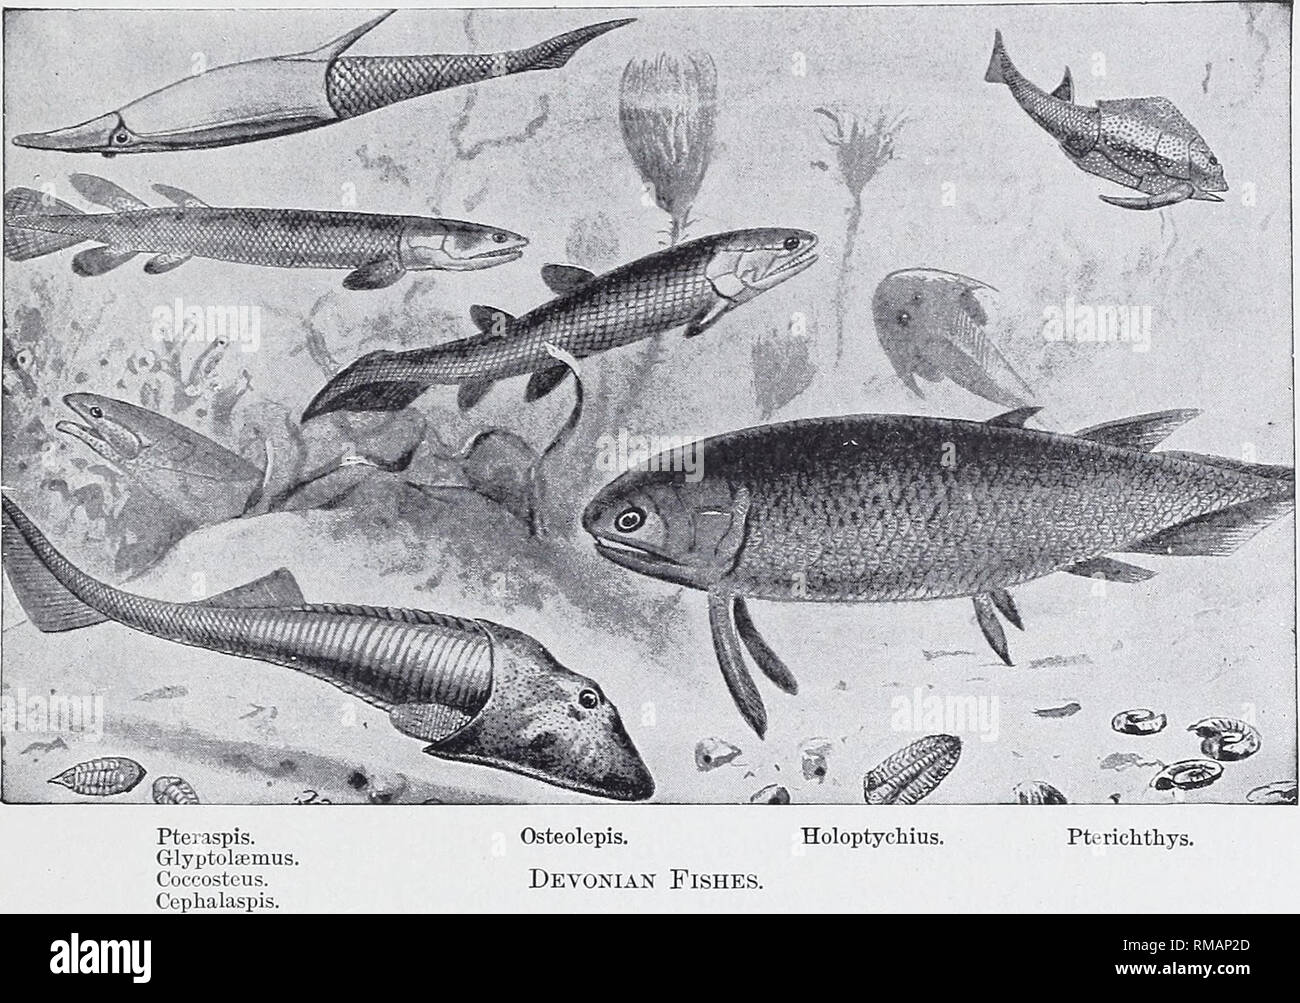 . Annual report. New York State Museum; Science; Science. DEVONIC FISHES OF THE NEW YORK FORMATIONS 167 more closely with Rhizodonts, and is definitely assigned to that family by Woodward. The enlarged scale ornament of the type specimen described by Hall is shown in plate 7, figure 9. A fairly accurate concept of the appearance presented by several Crossopterygian and other typical Devonic fishes is afforded by the restoration given in text figure 35, for which we are indebted to Mr F. A. Lucas, author of Animals before Man in Noi^ih Auierica and other popular works.. Osteolepis. Devonian Fis Stock Photo